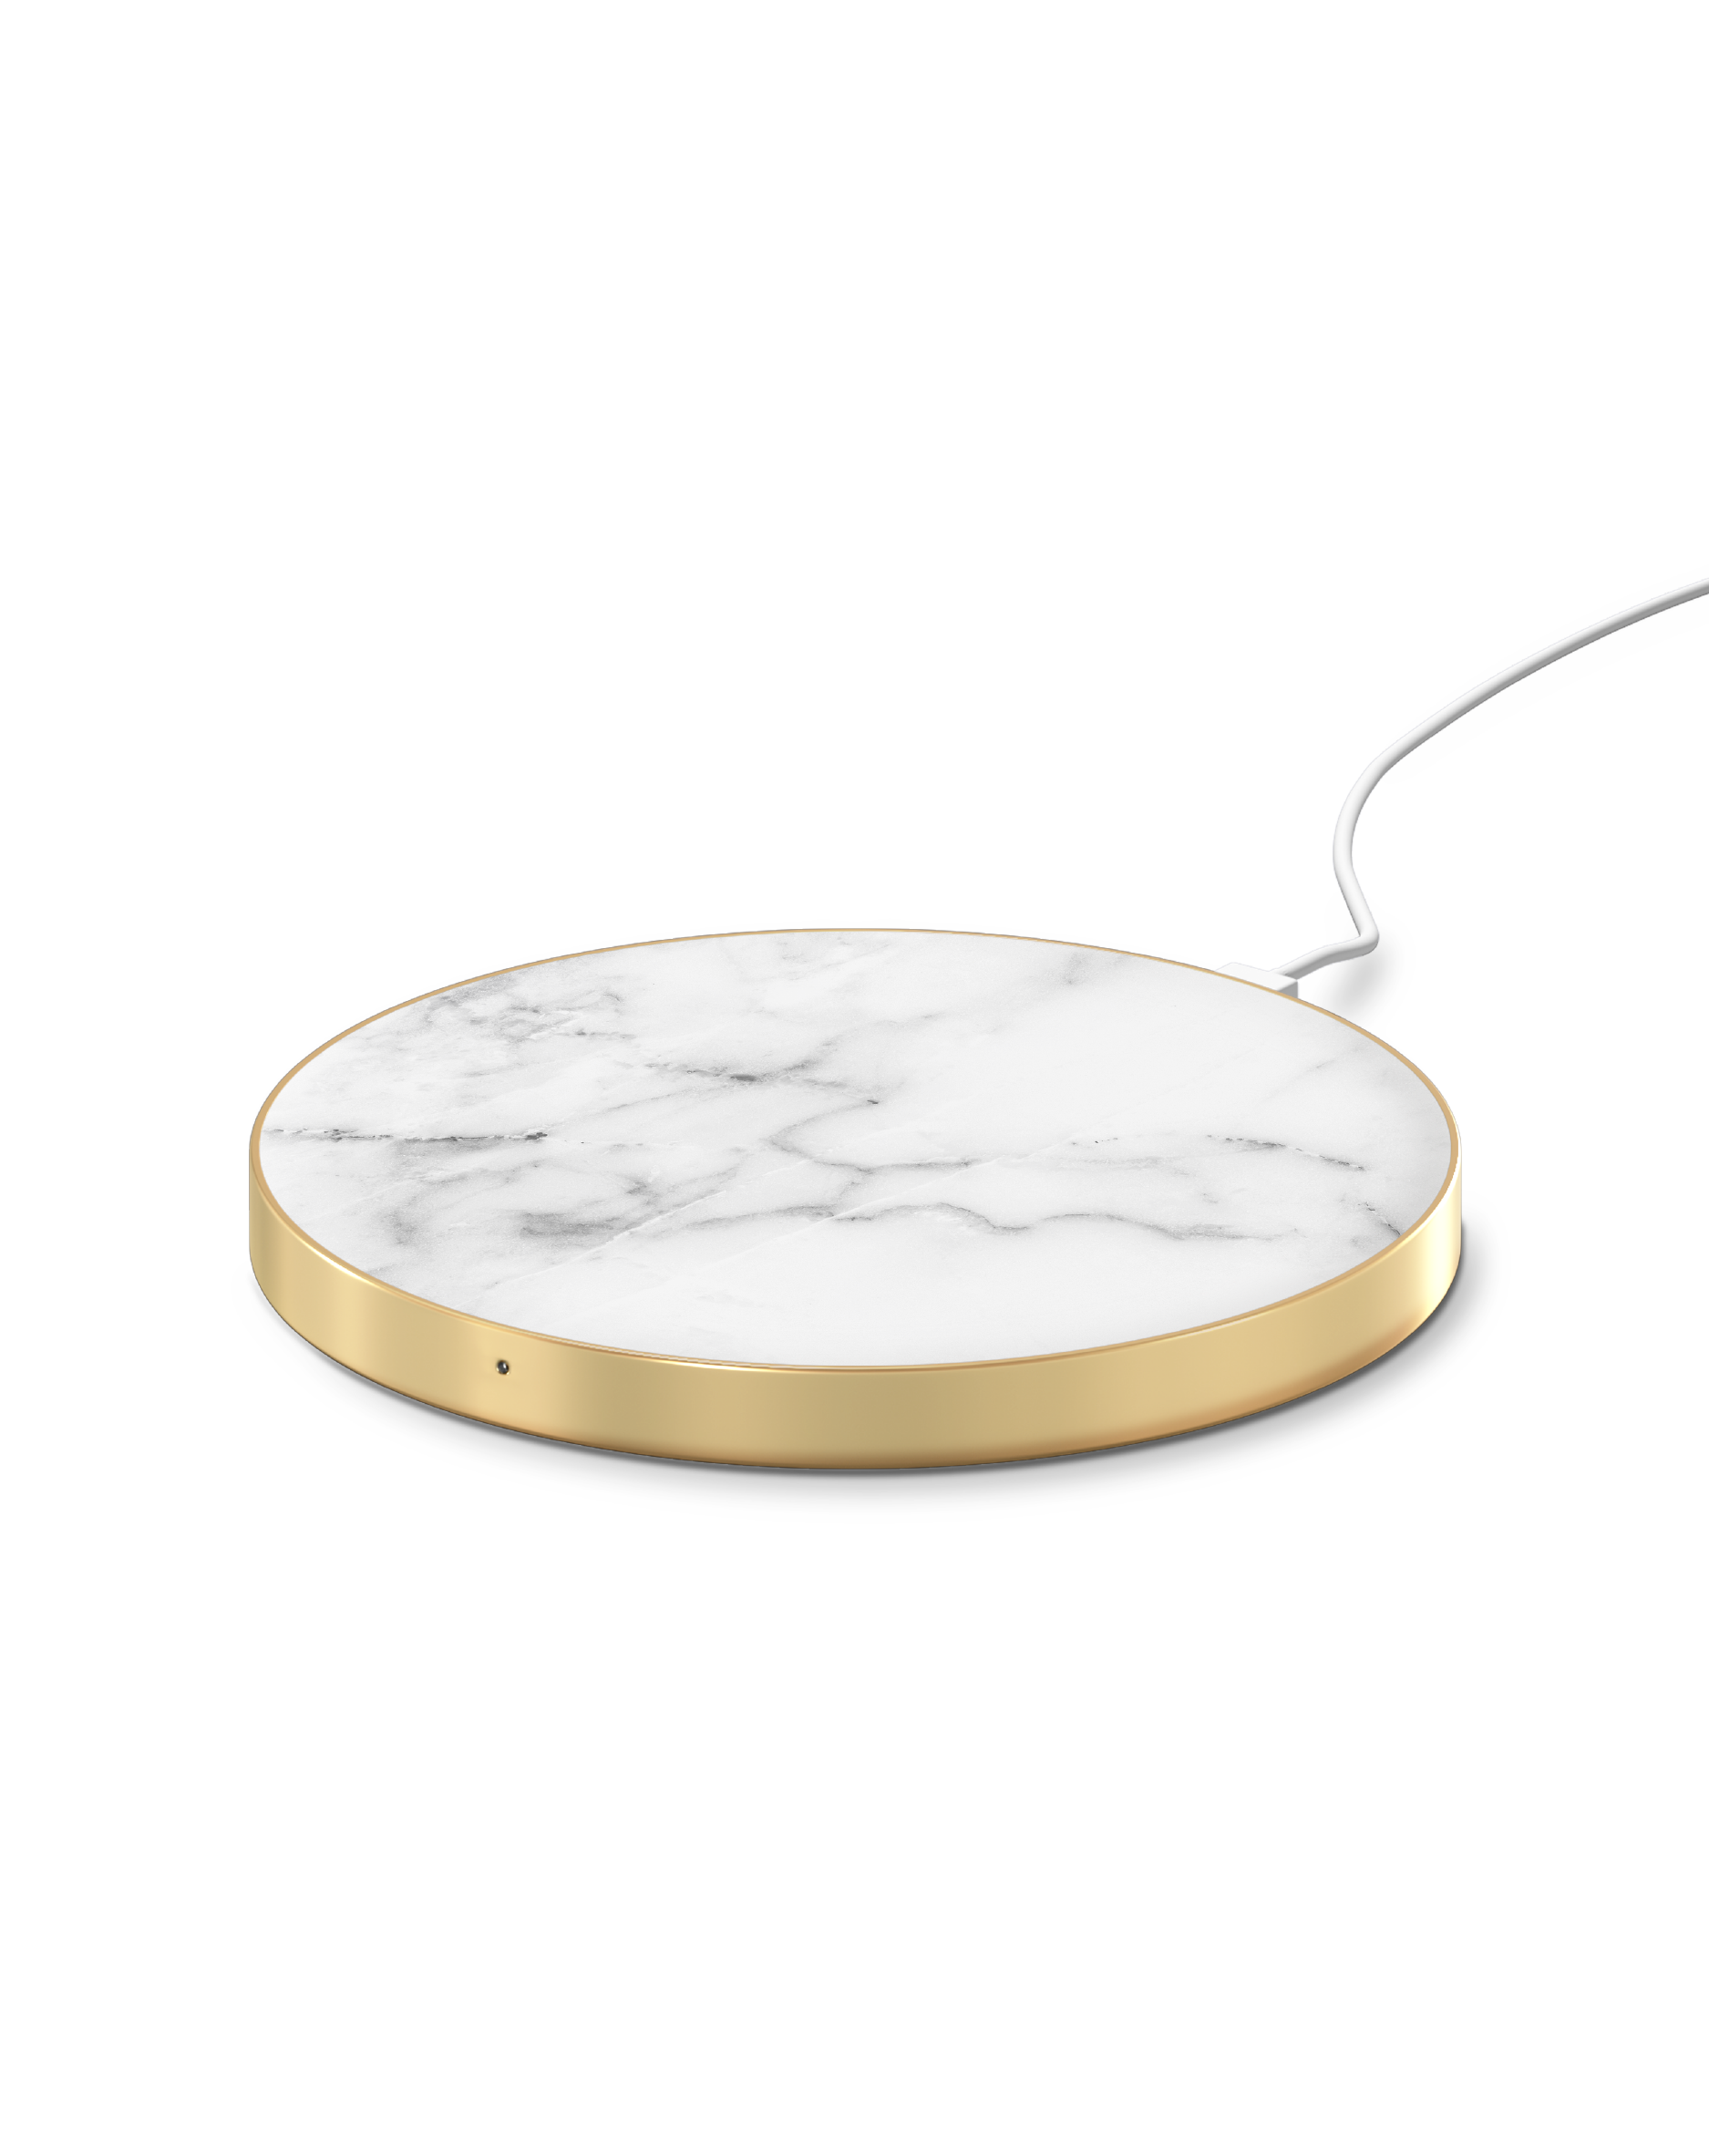 OF IDFQI-22 SWEDEN inductive Qi charging White Charger Universal, Marble station IDEAL